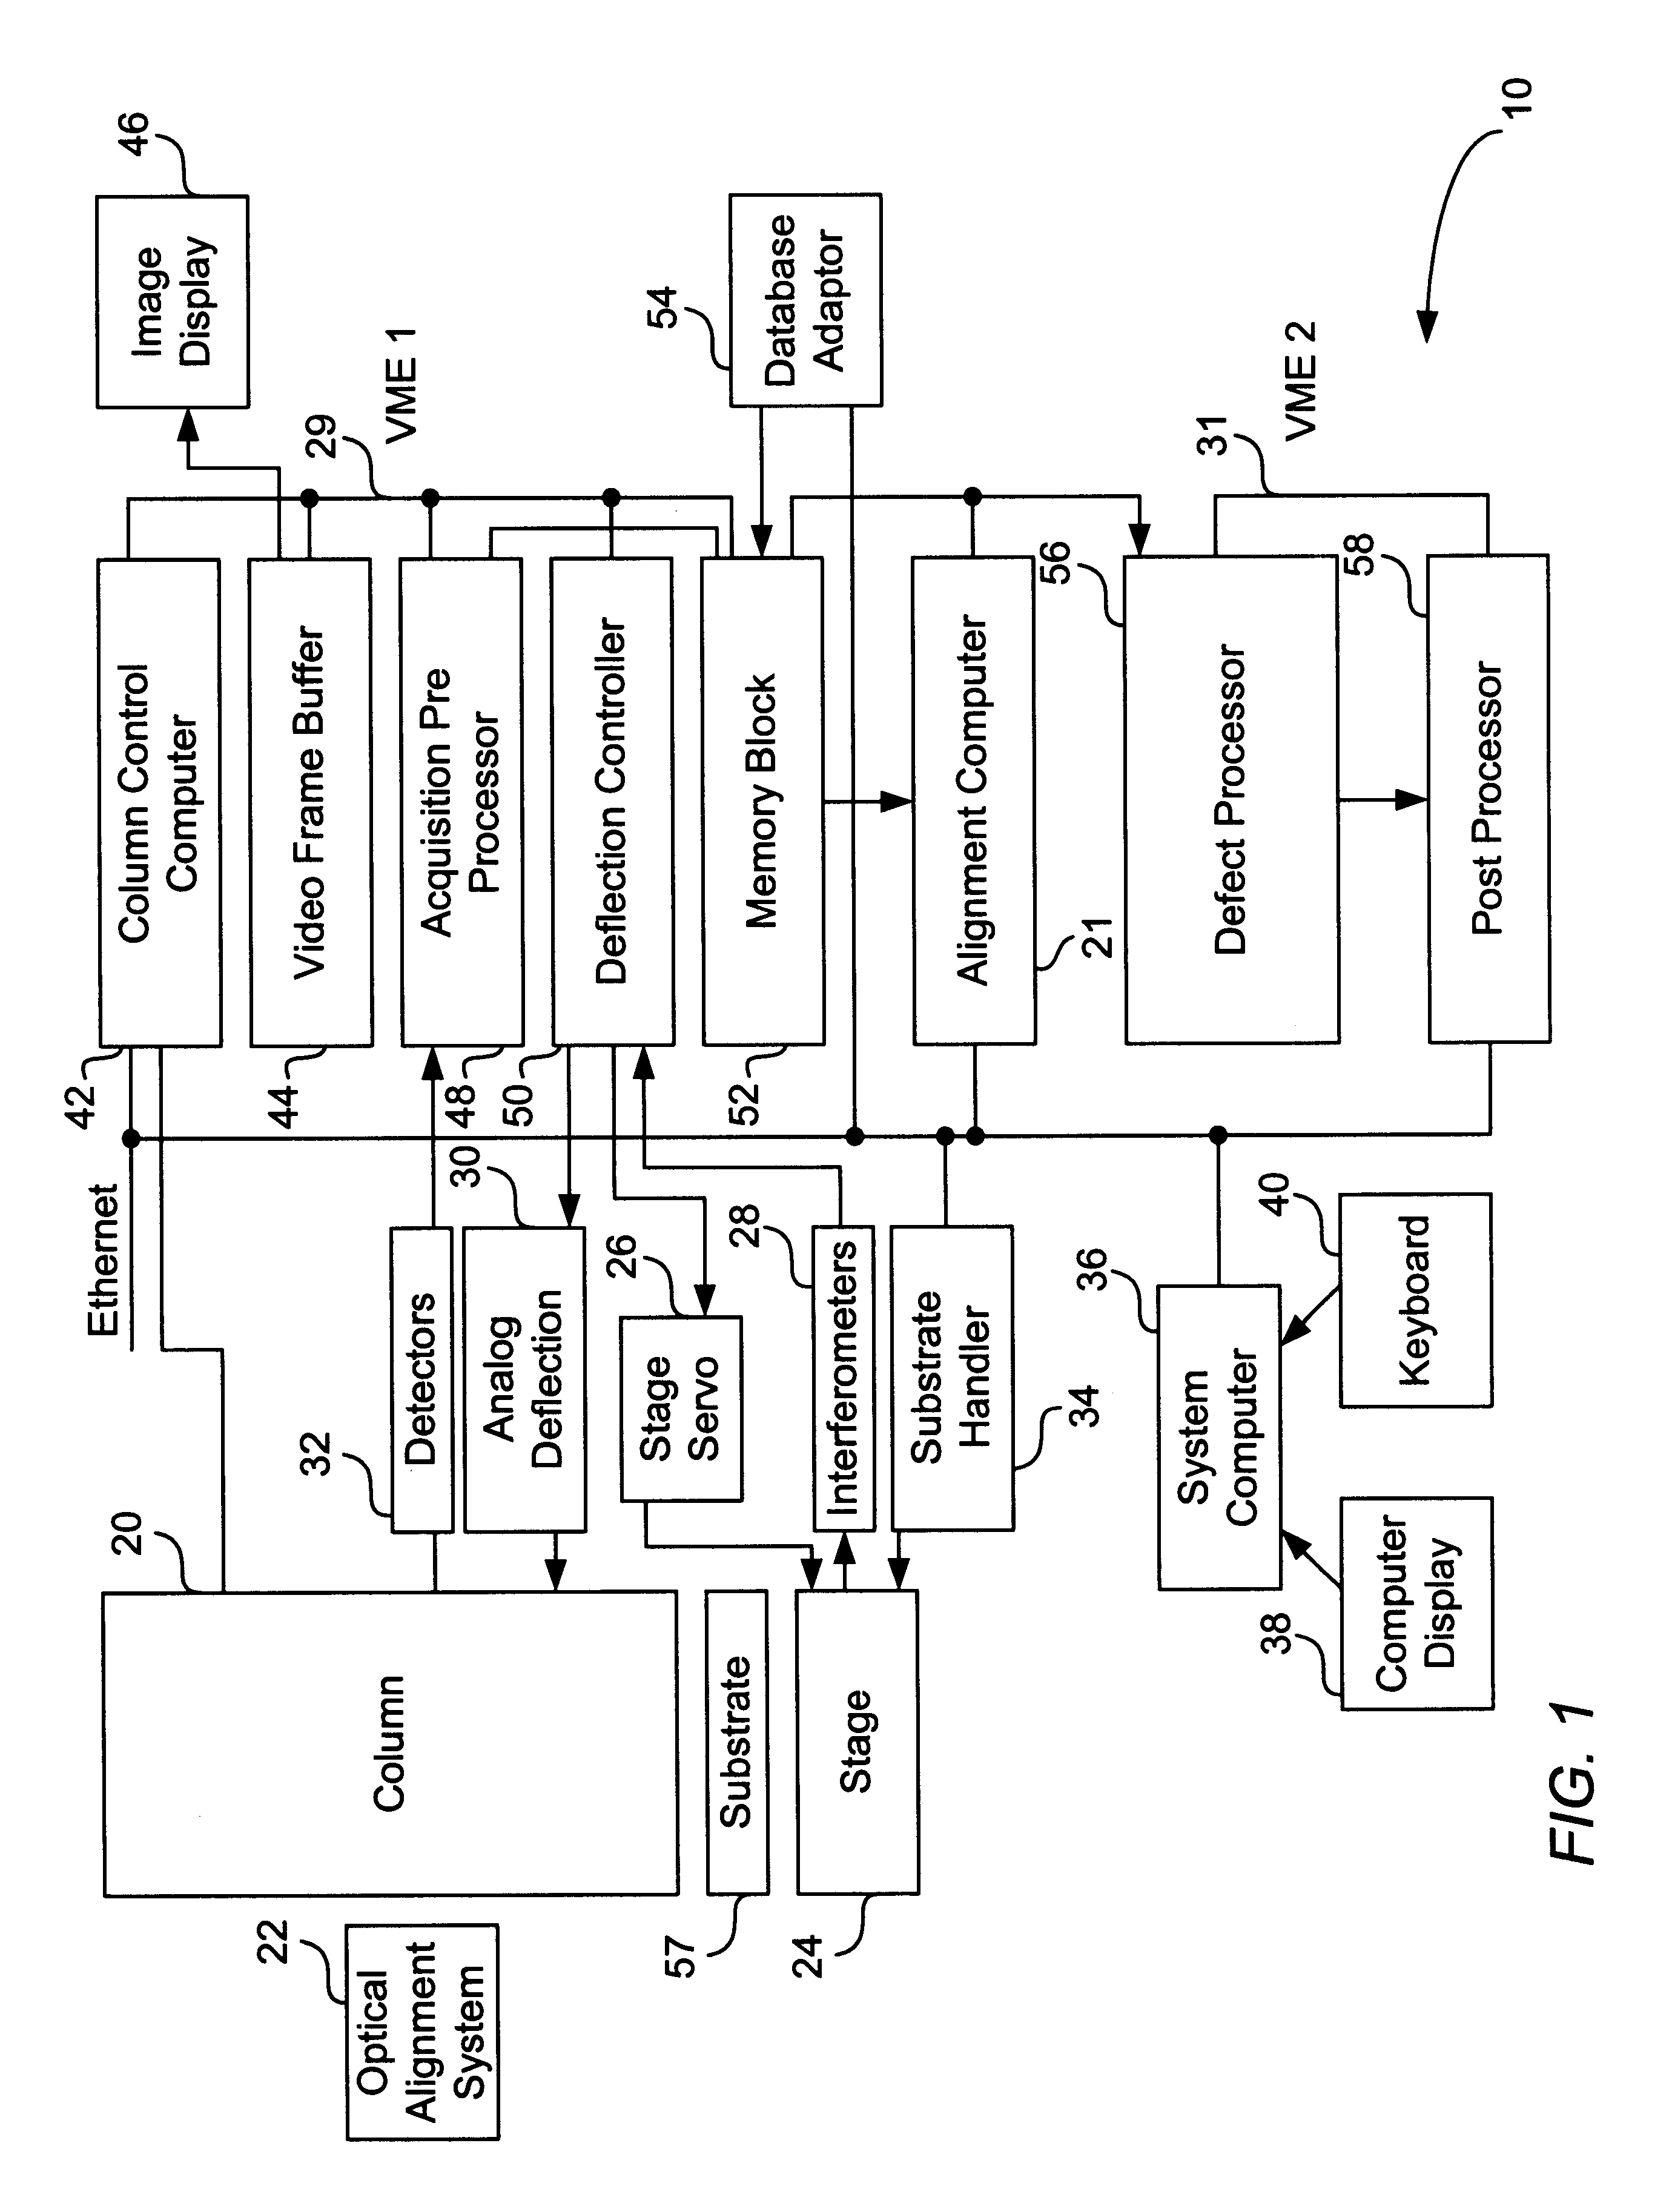 Continuous movement scans of test structures on semiconductor integrated circuits